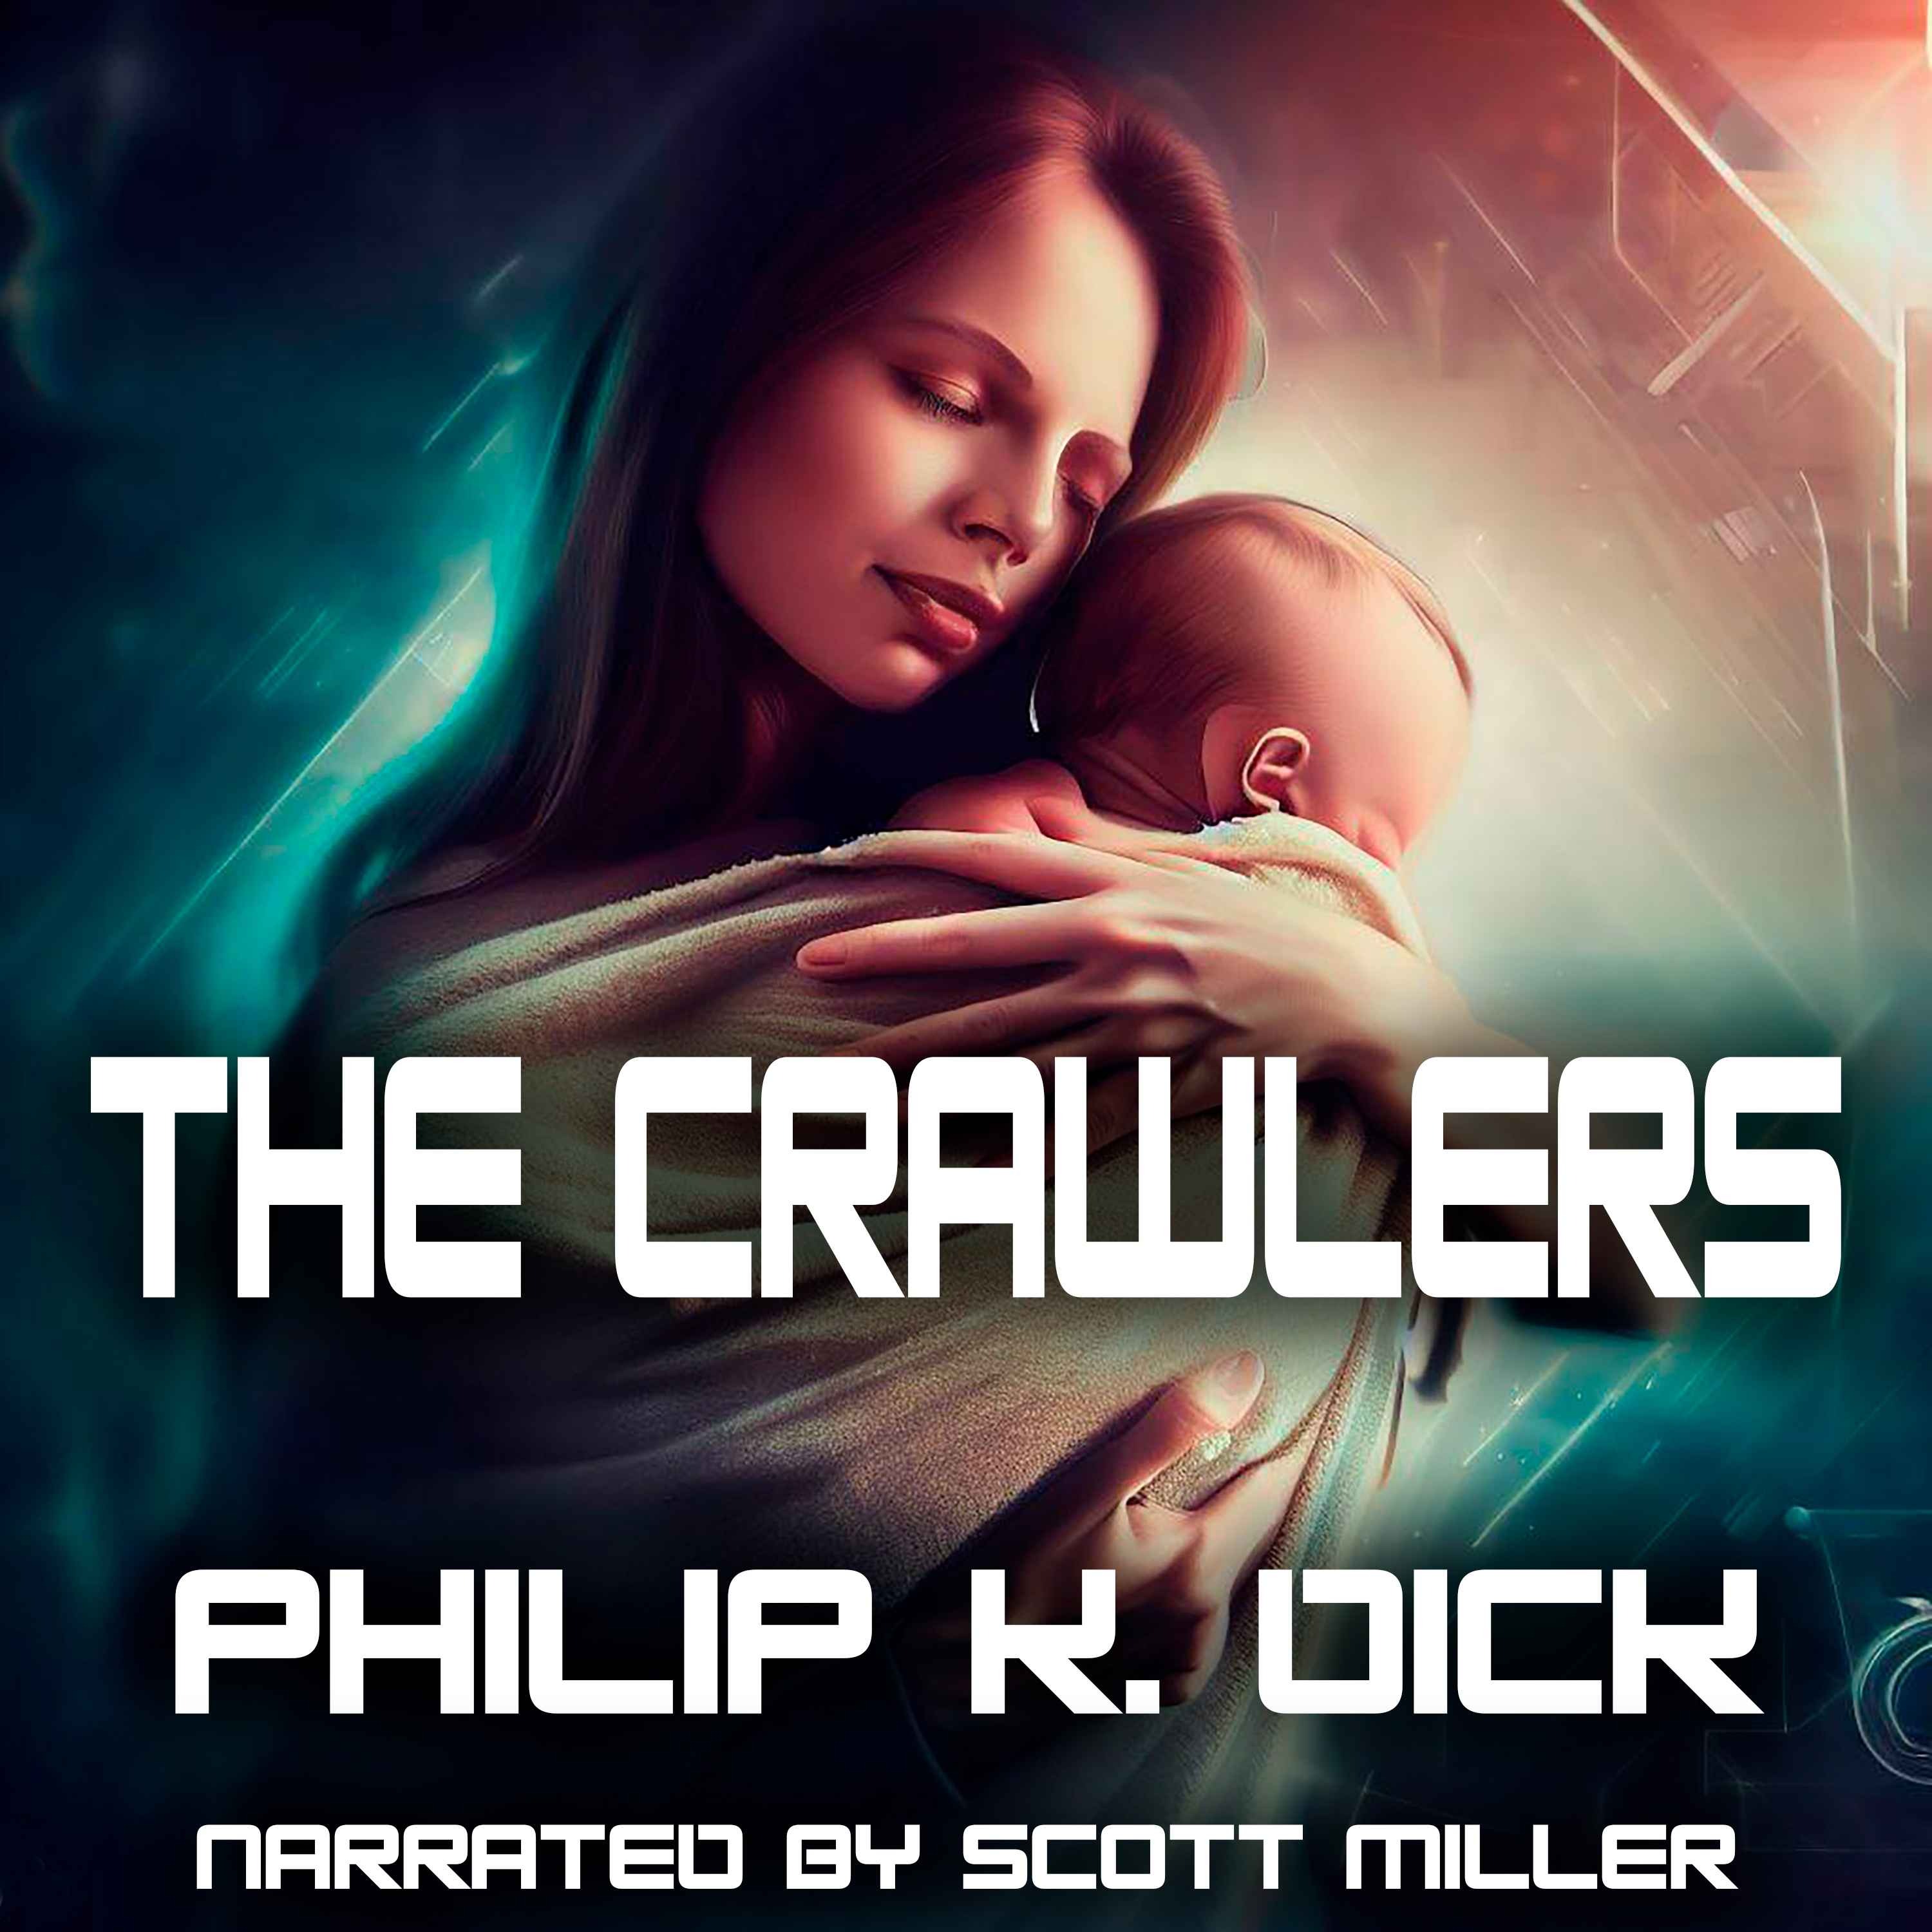 The Crawlers by Philip K. Dick - Creepy Stories - Scary Stories